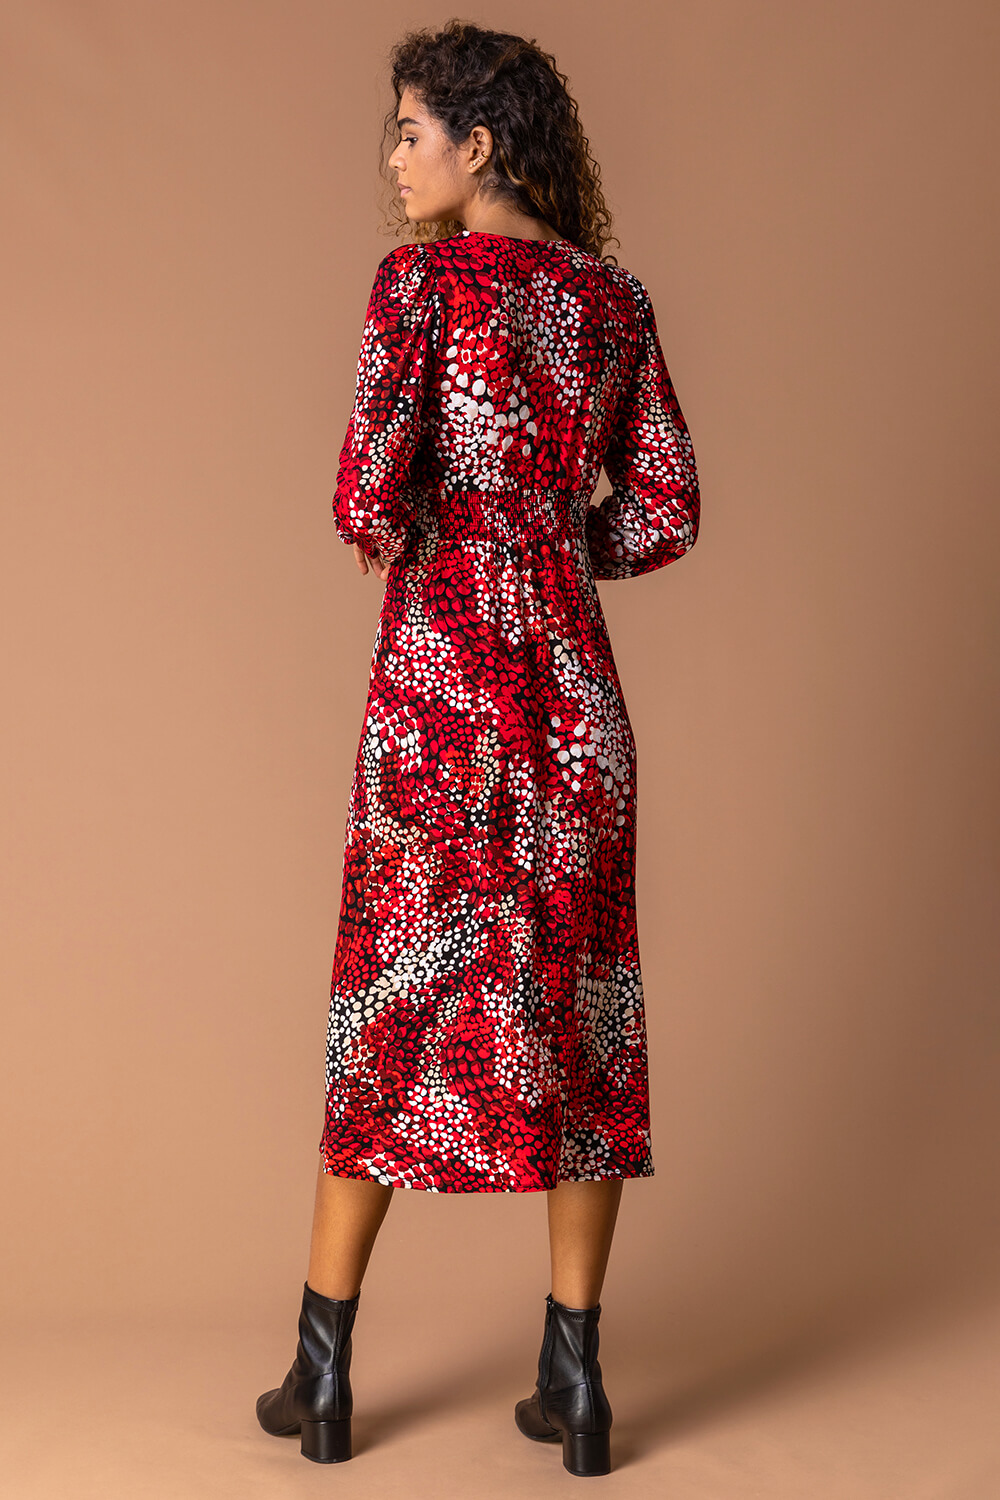 Abstract Animal Print Midi Dress in Red ...